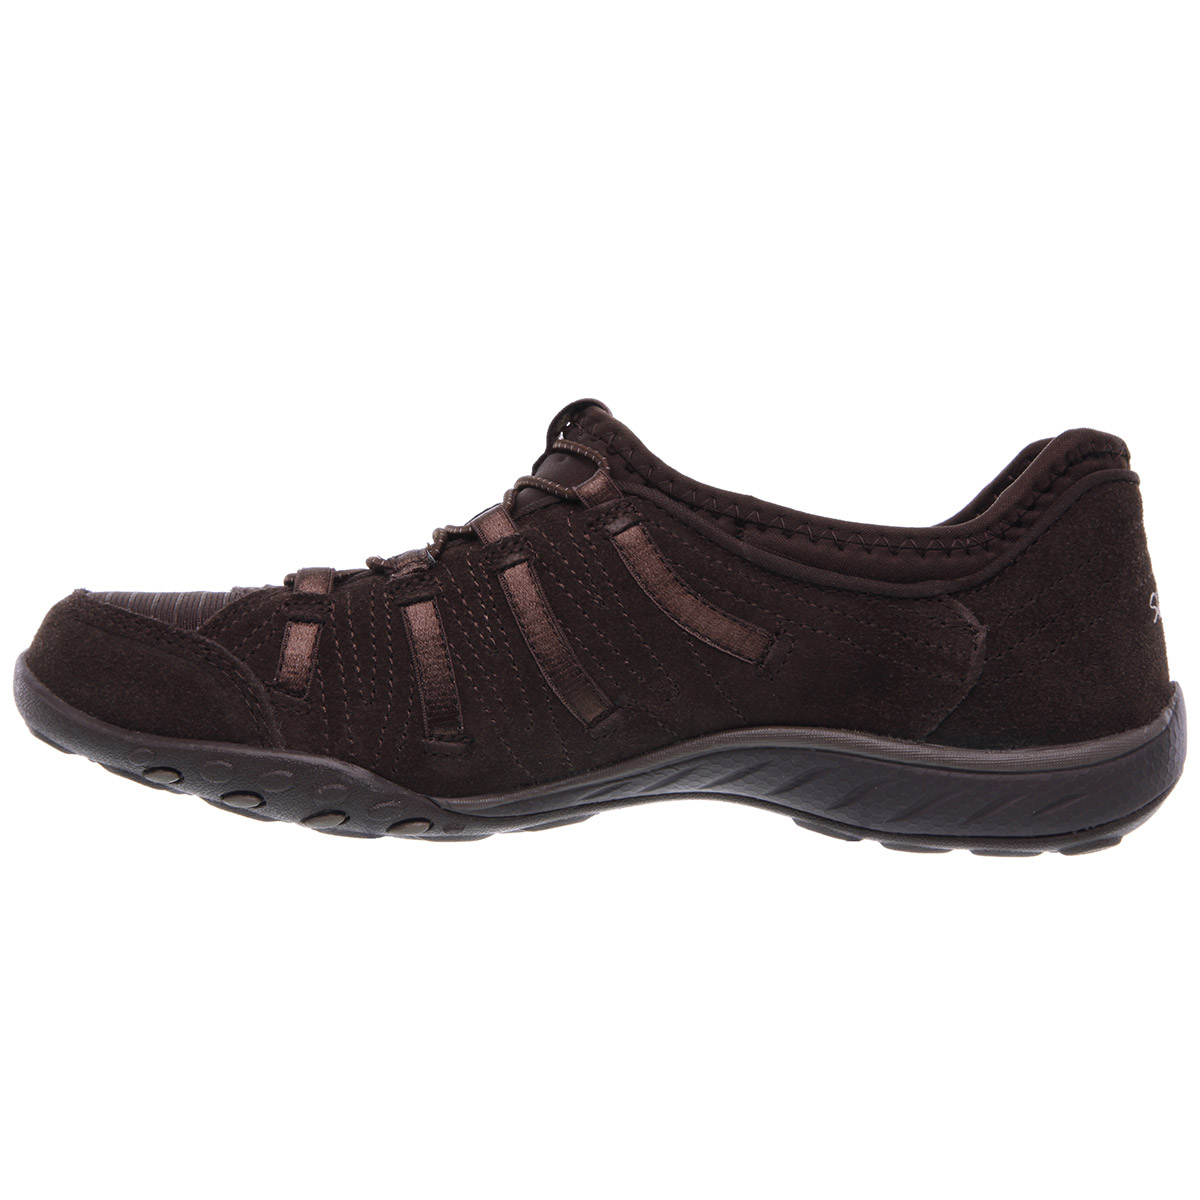 brown skechers shoes womens Sale,up to 